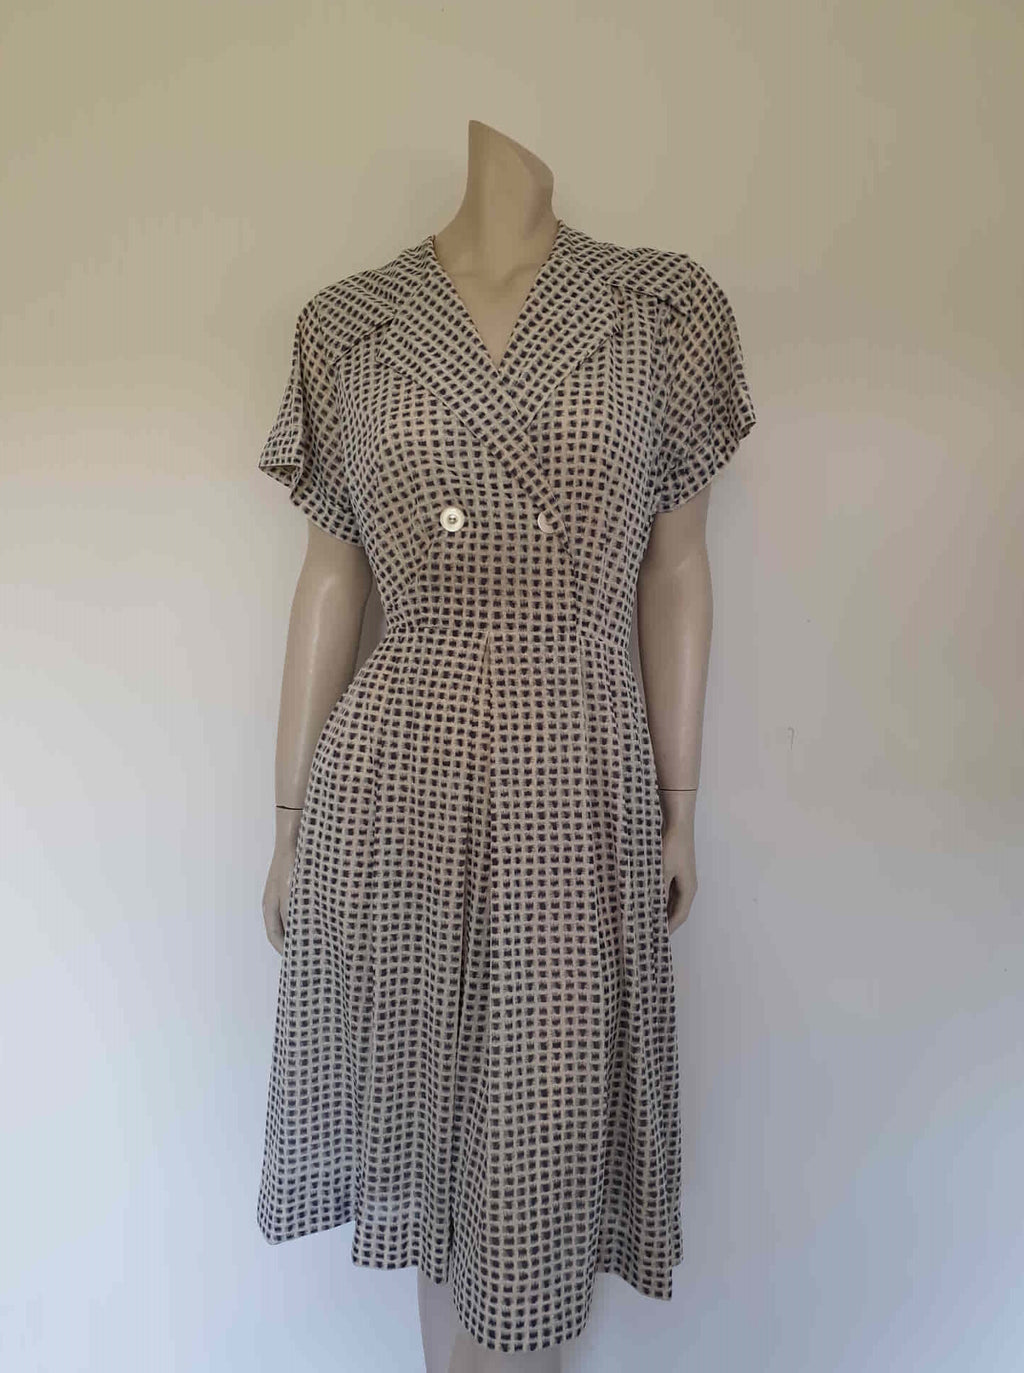 1950s vintage grey and white shirtwaist dress wide collar and crossover bodice full skirt - Medium